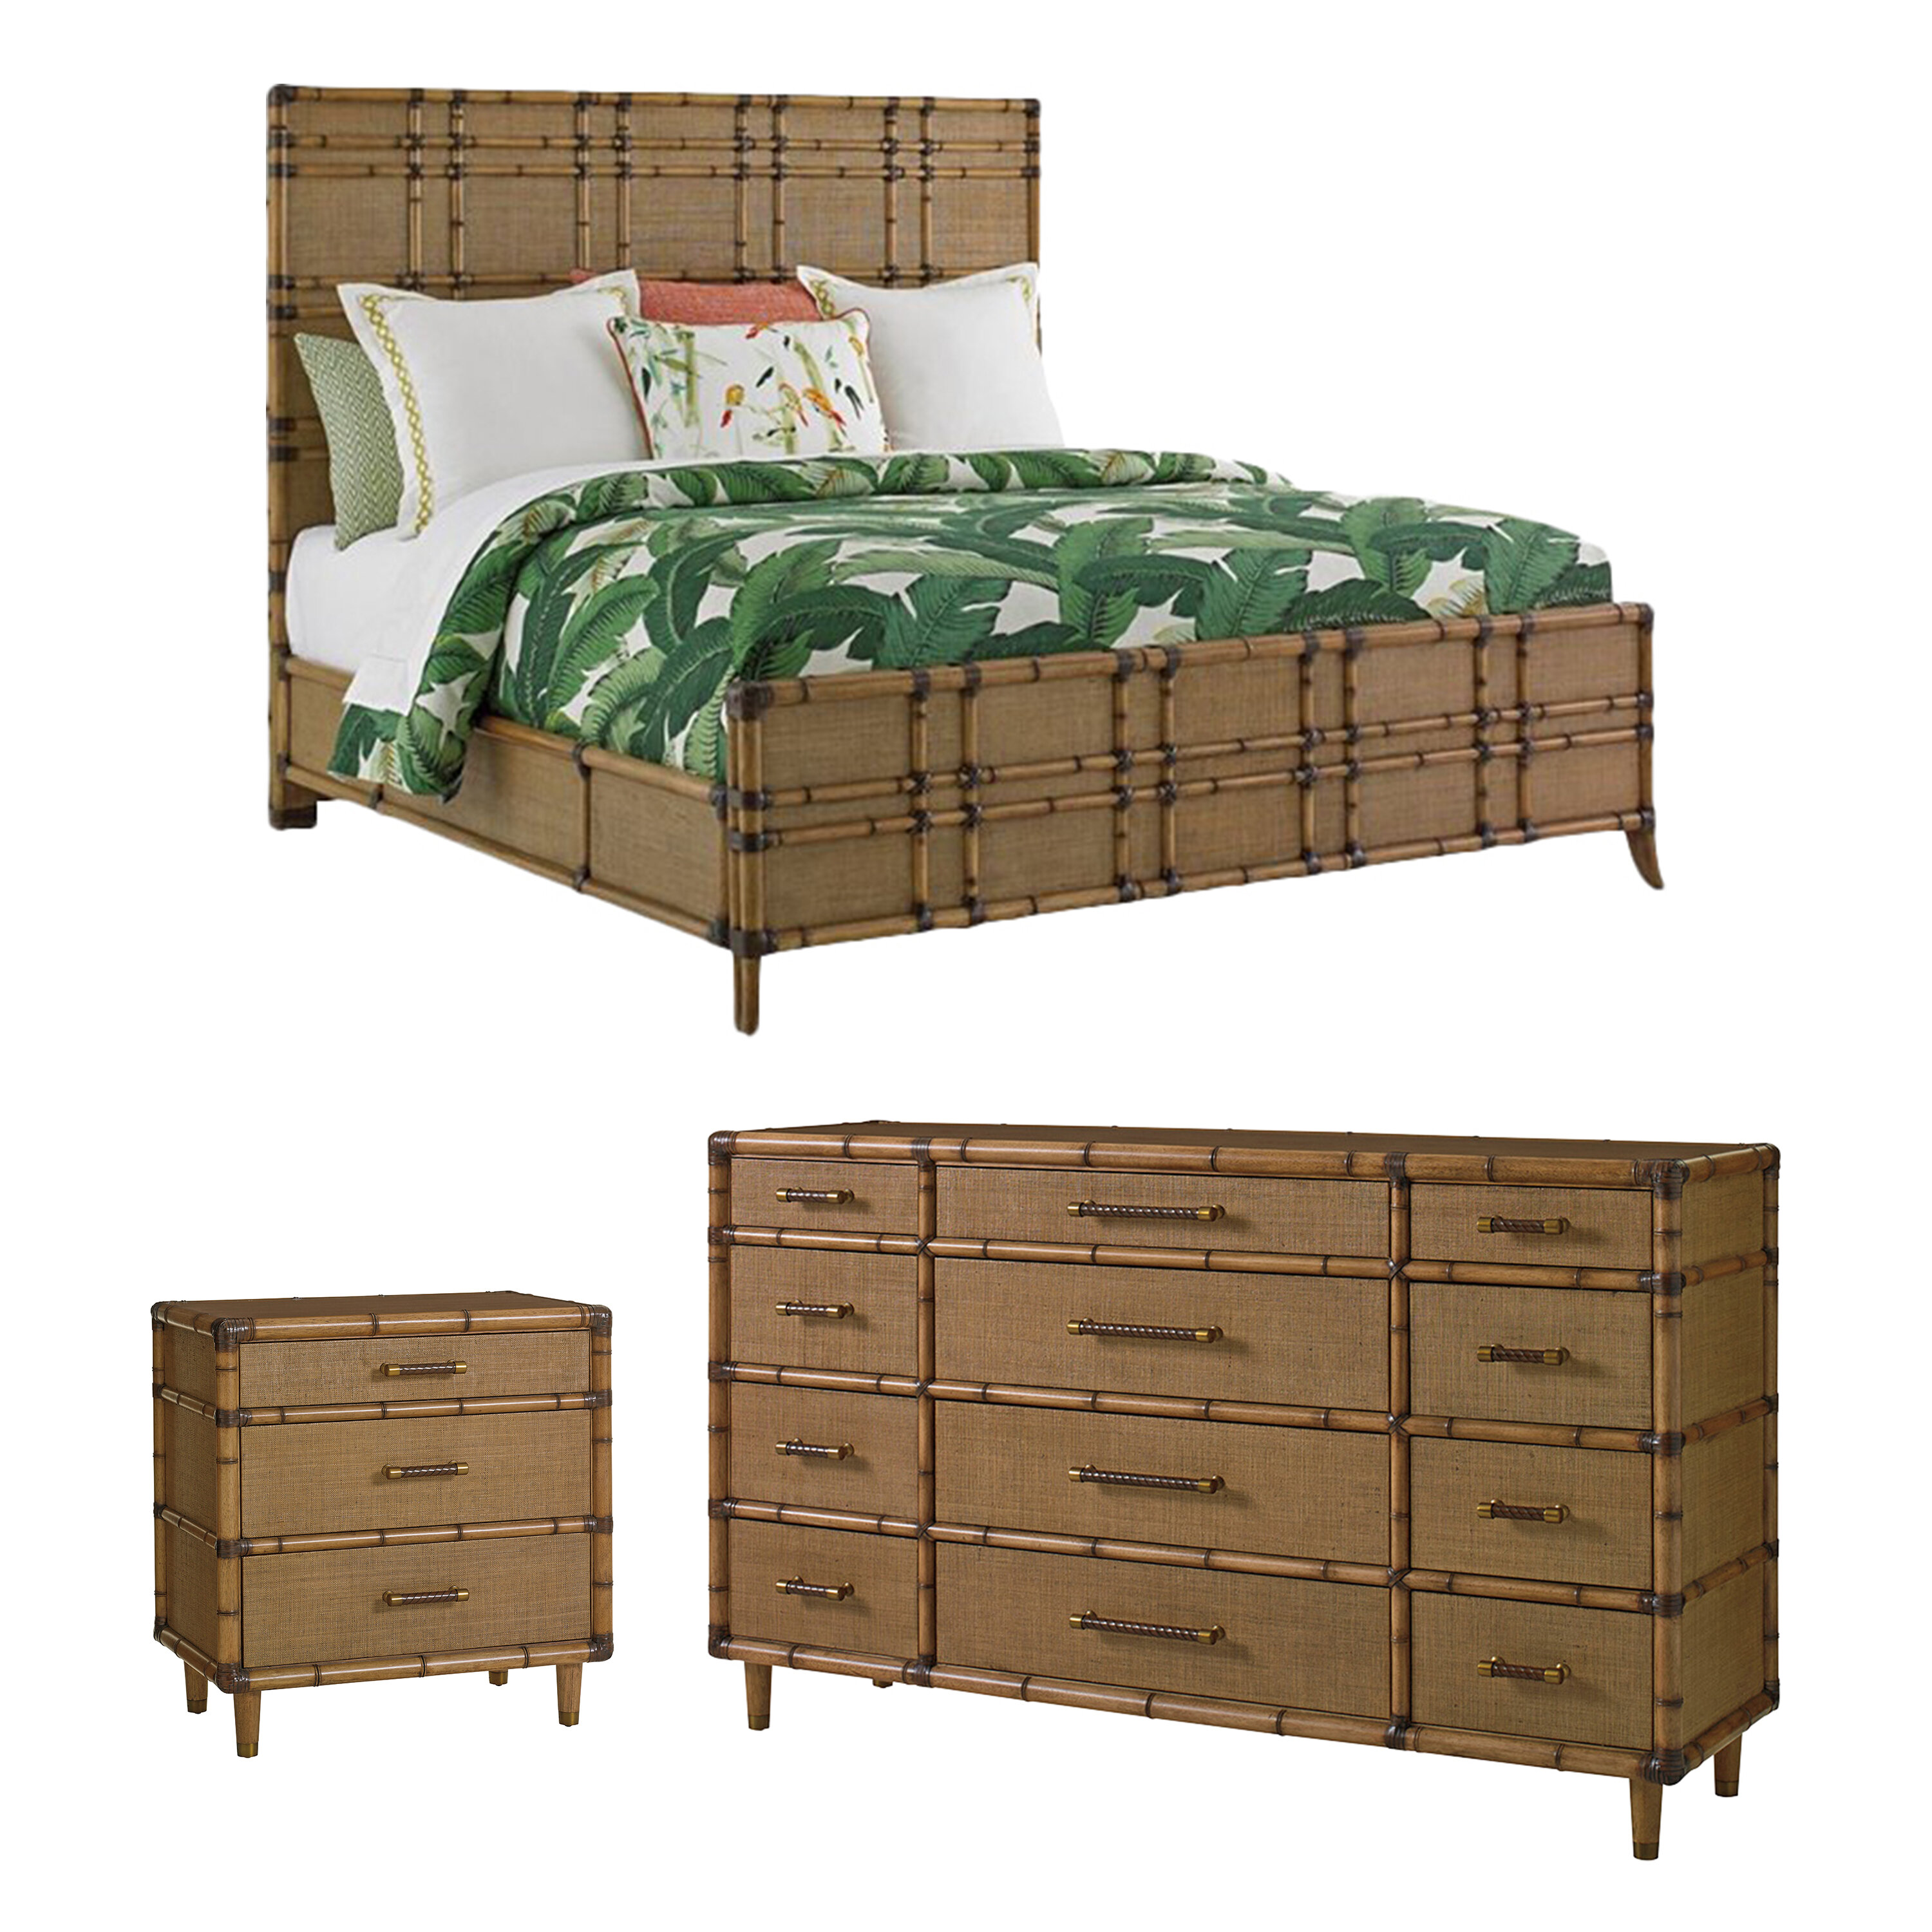 Excelent bamboo bedroom furniture Captains Bed Drawers Bedroom Sets You Ll Love In 2021 Wayfair